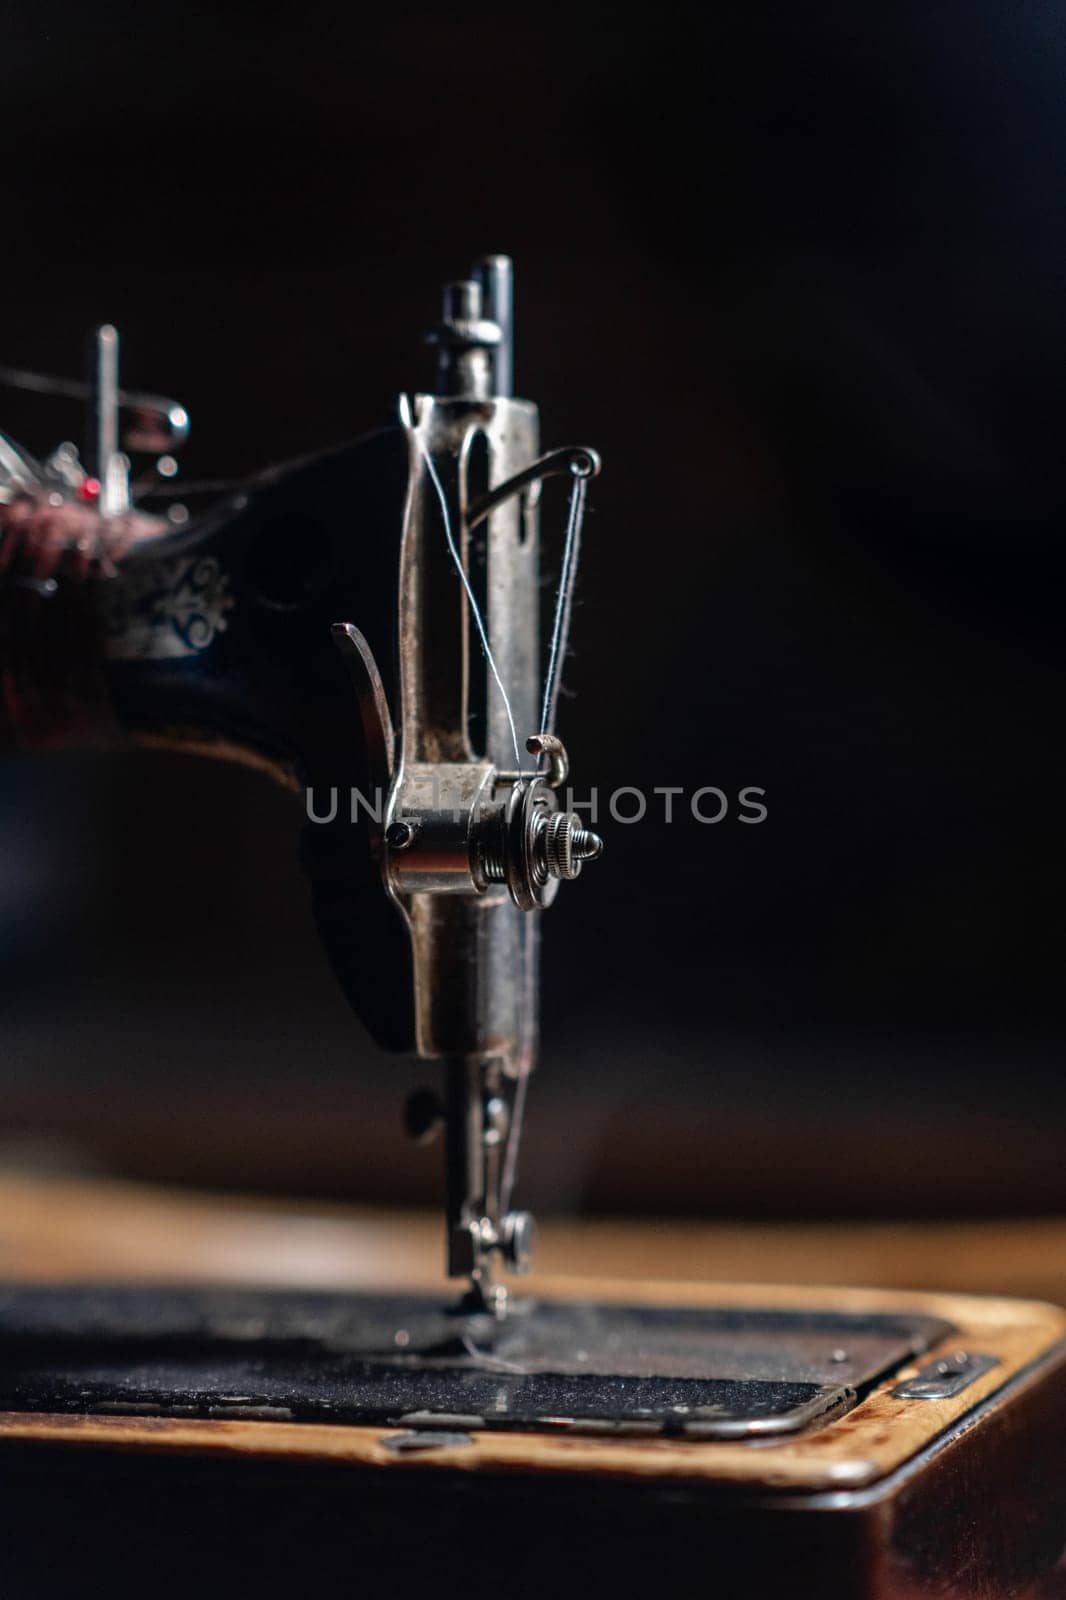 An old sewing machine stands on the table at home ready to work and sew. Classic retro style manual sewing machine ready for sewing work. The machine is old style made of metal with floral patterns